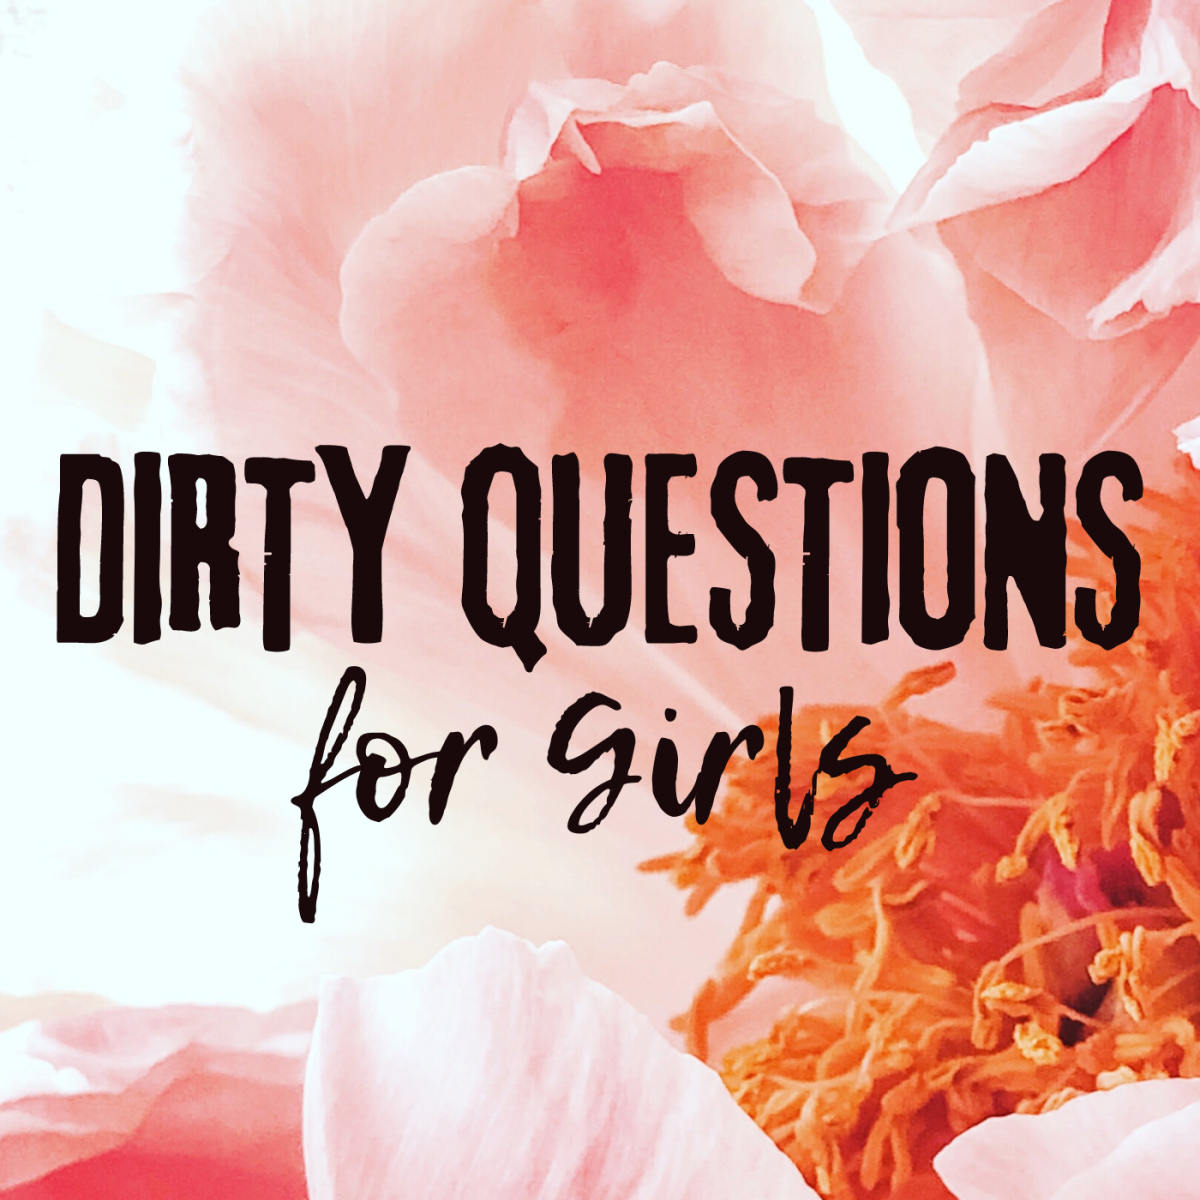 Get flirty (and a little dirty) with your girl by asking her these intimate questions!